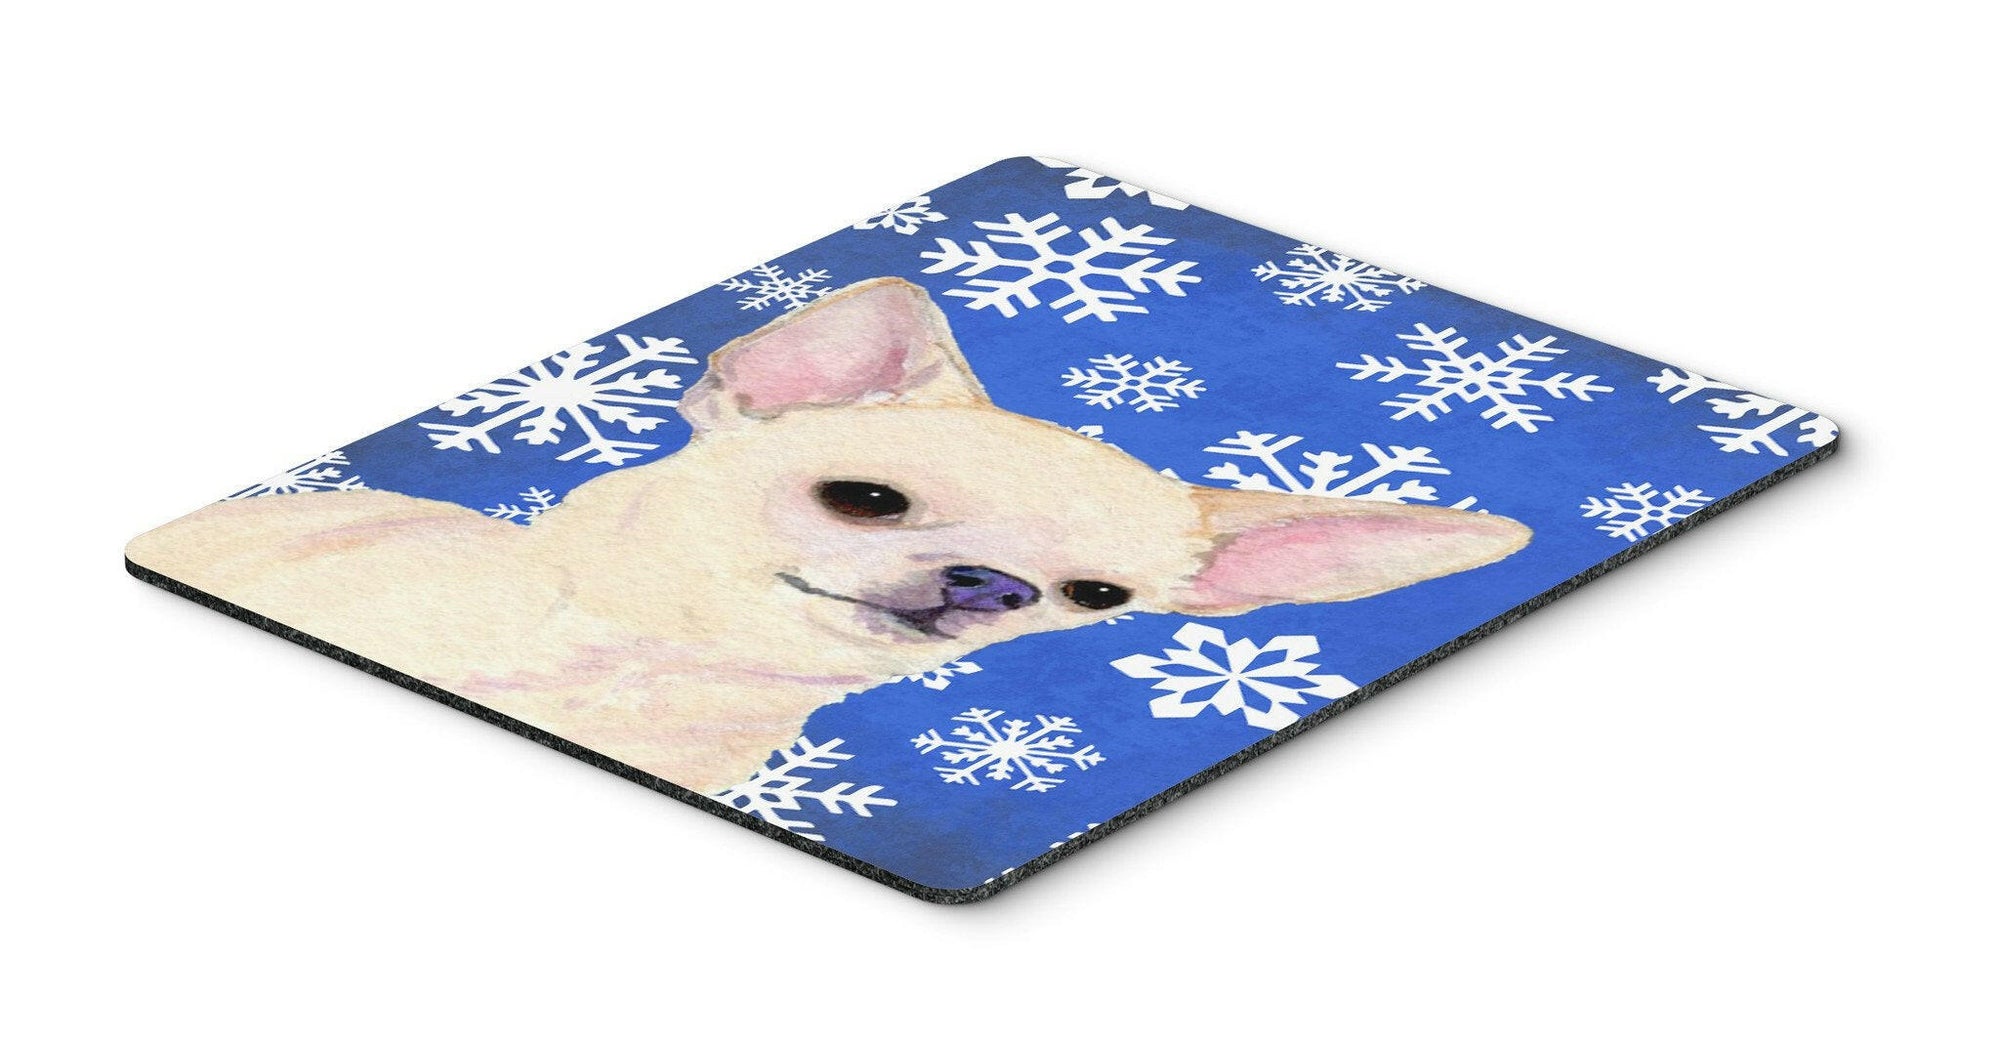 Chihuahua Winter Snowflakes Holiday Mouse Pad, Hot Pad or Trivet by Caroline's Treasures